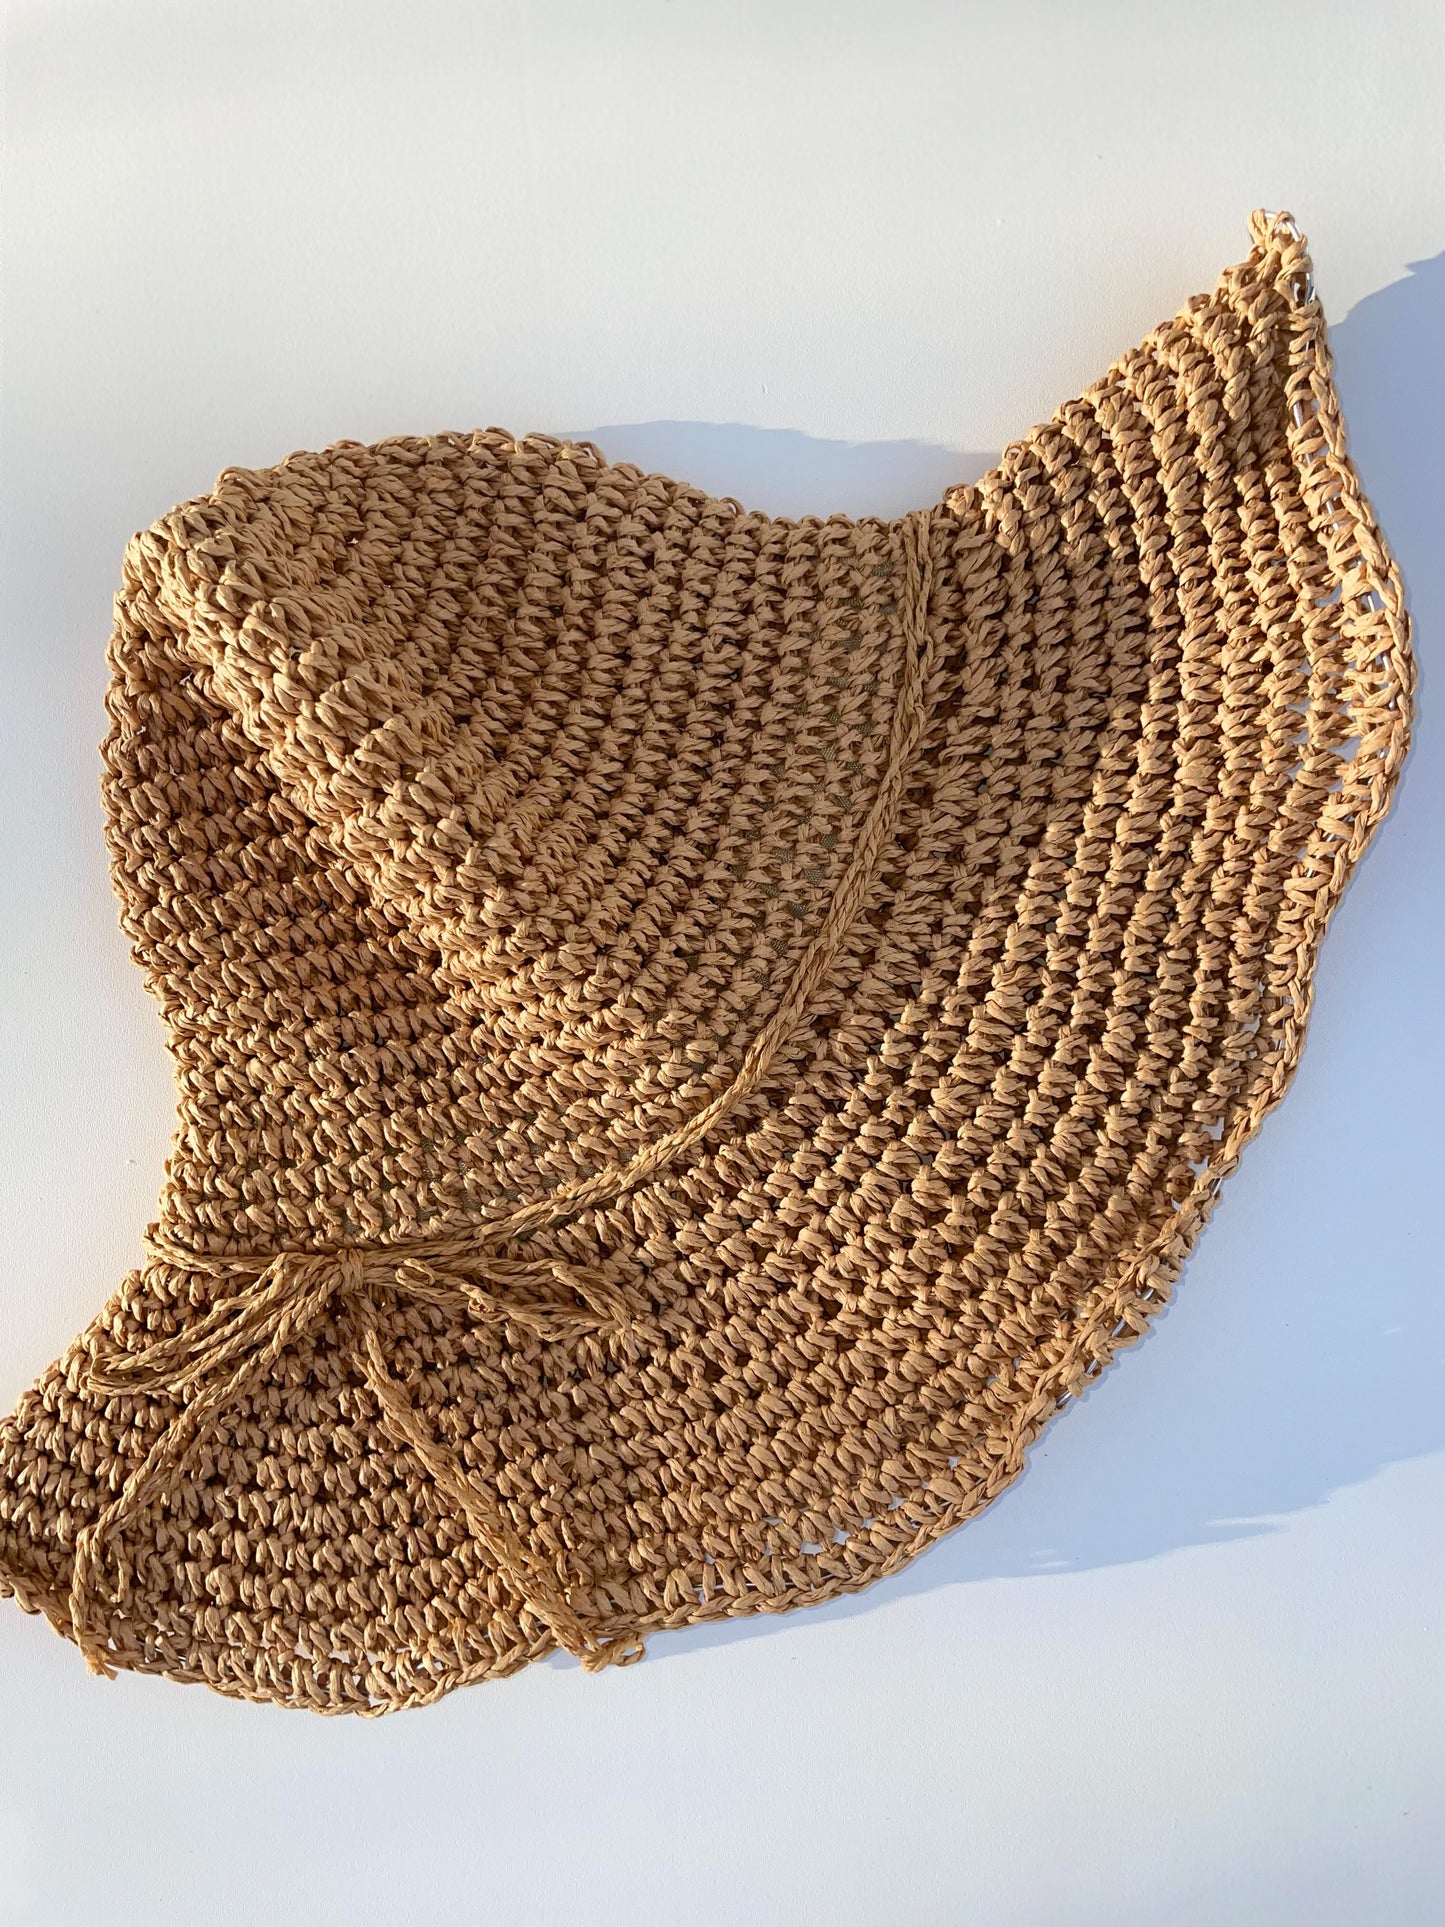 Woven Straw hat